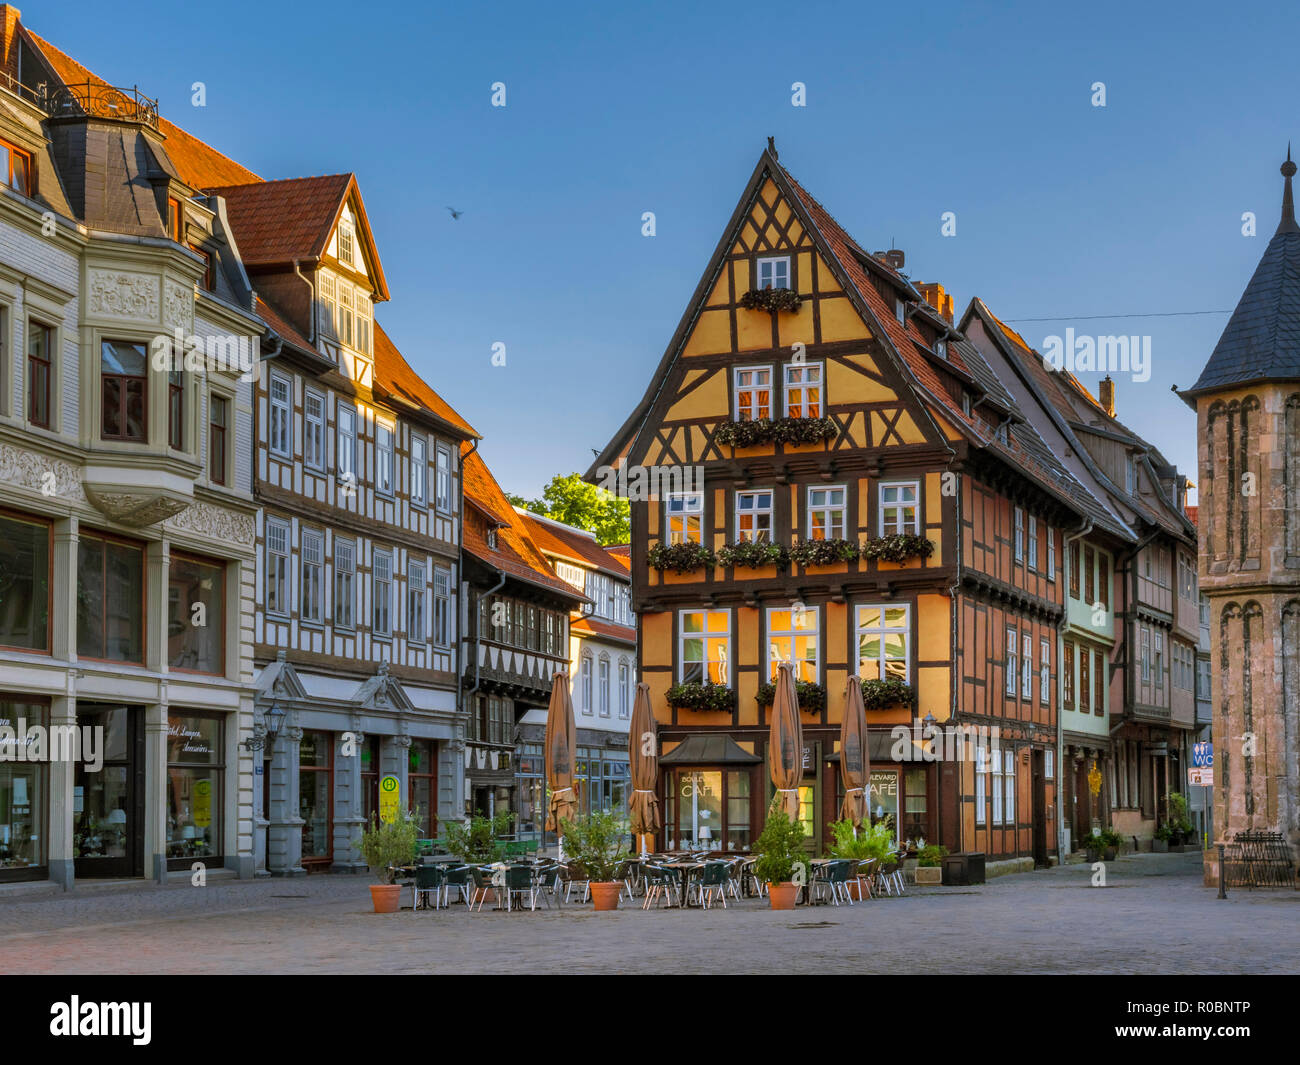 Cafe on the market square in the UNESCO World Heritage city of Quedlinburg, Saxony-Anhalt, Germany, Europe Stock Photo